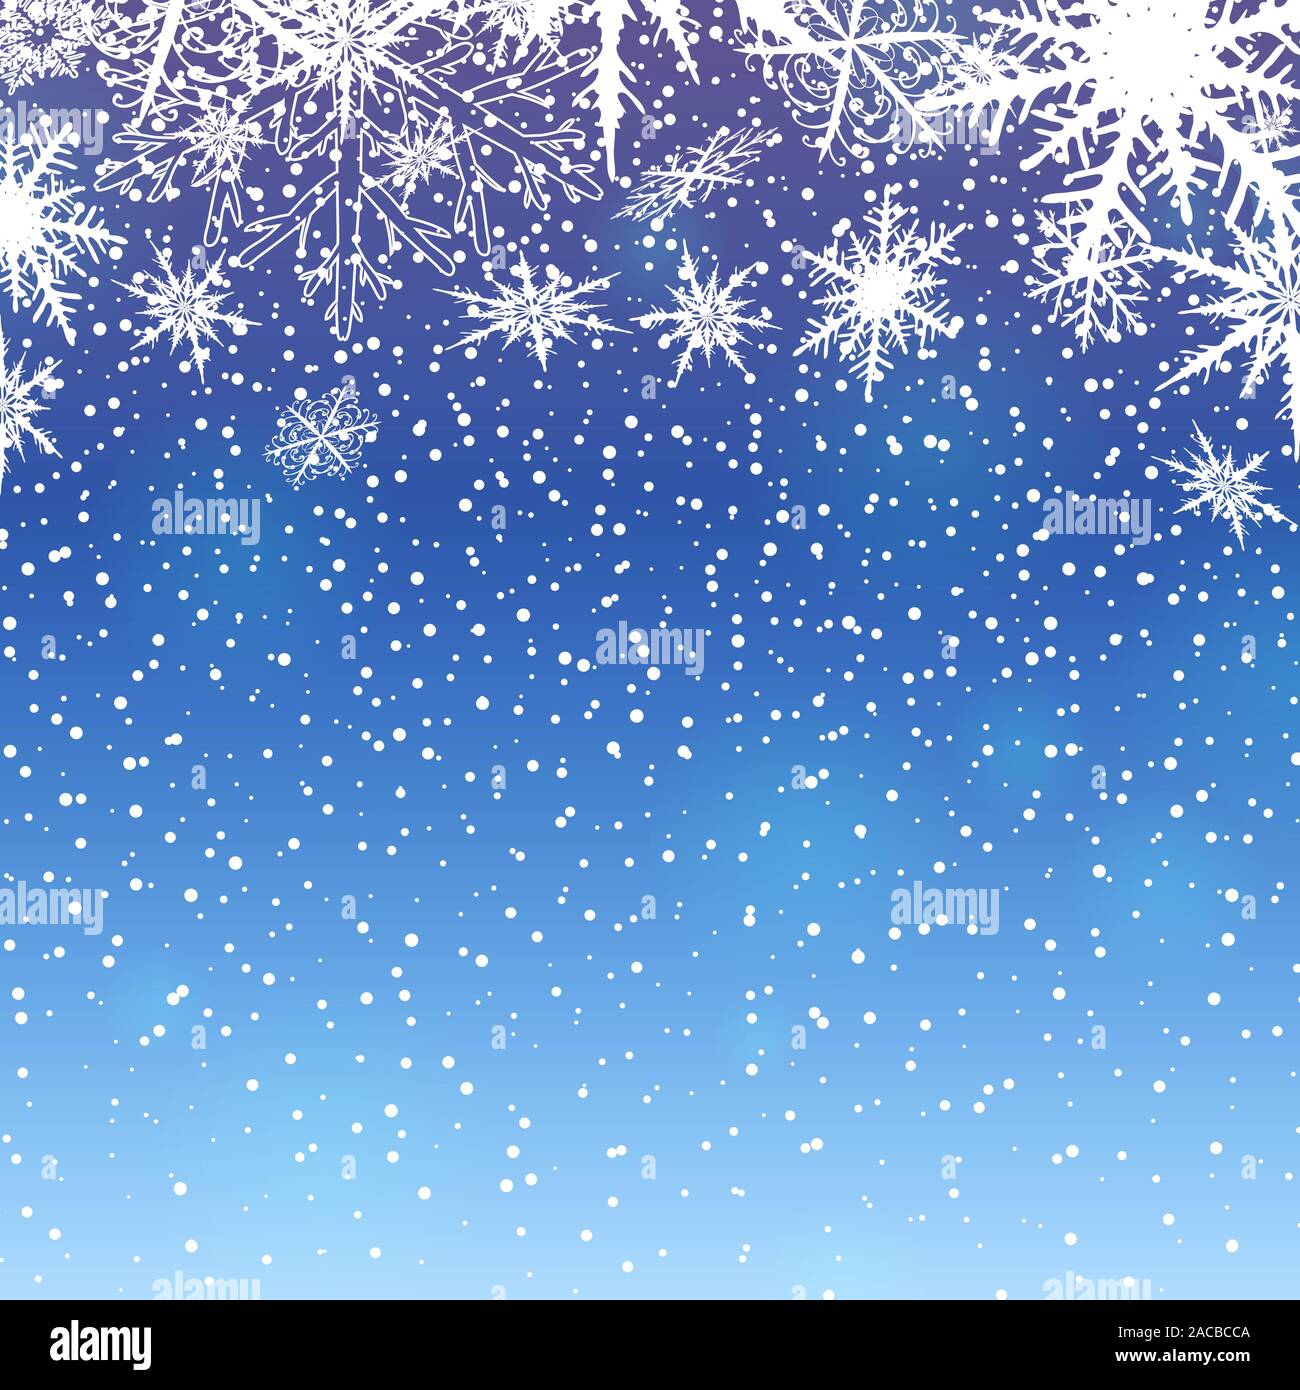 Winter background with snowflakes on blue. Vector illustration Stock Vector